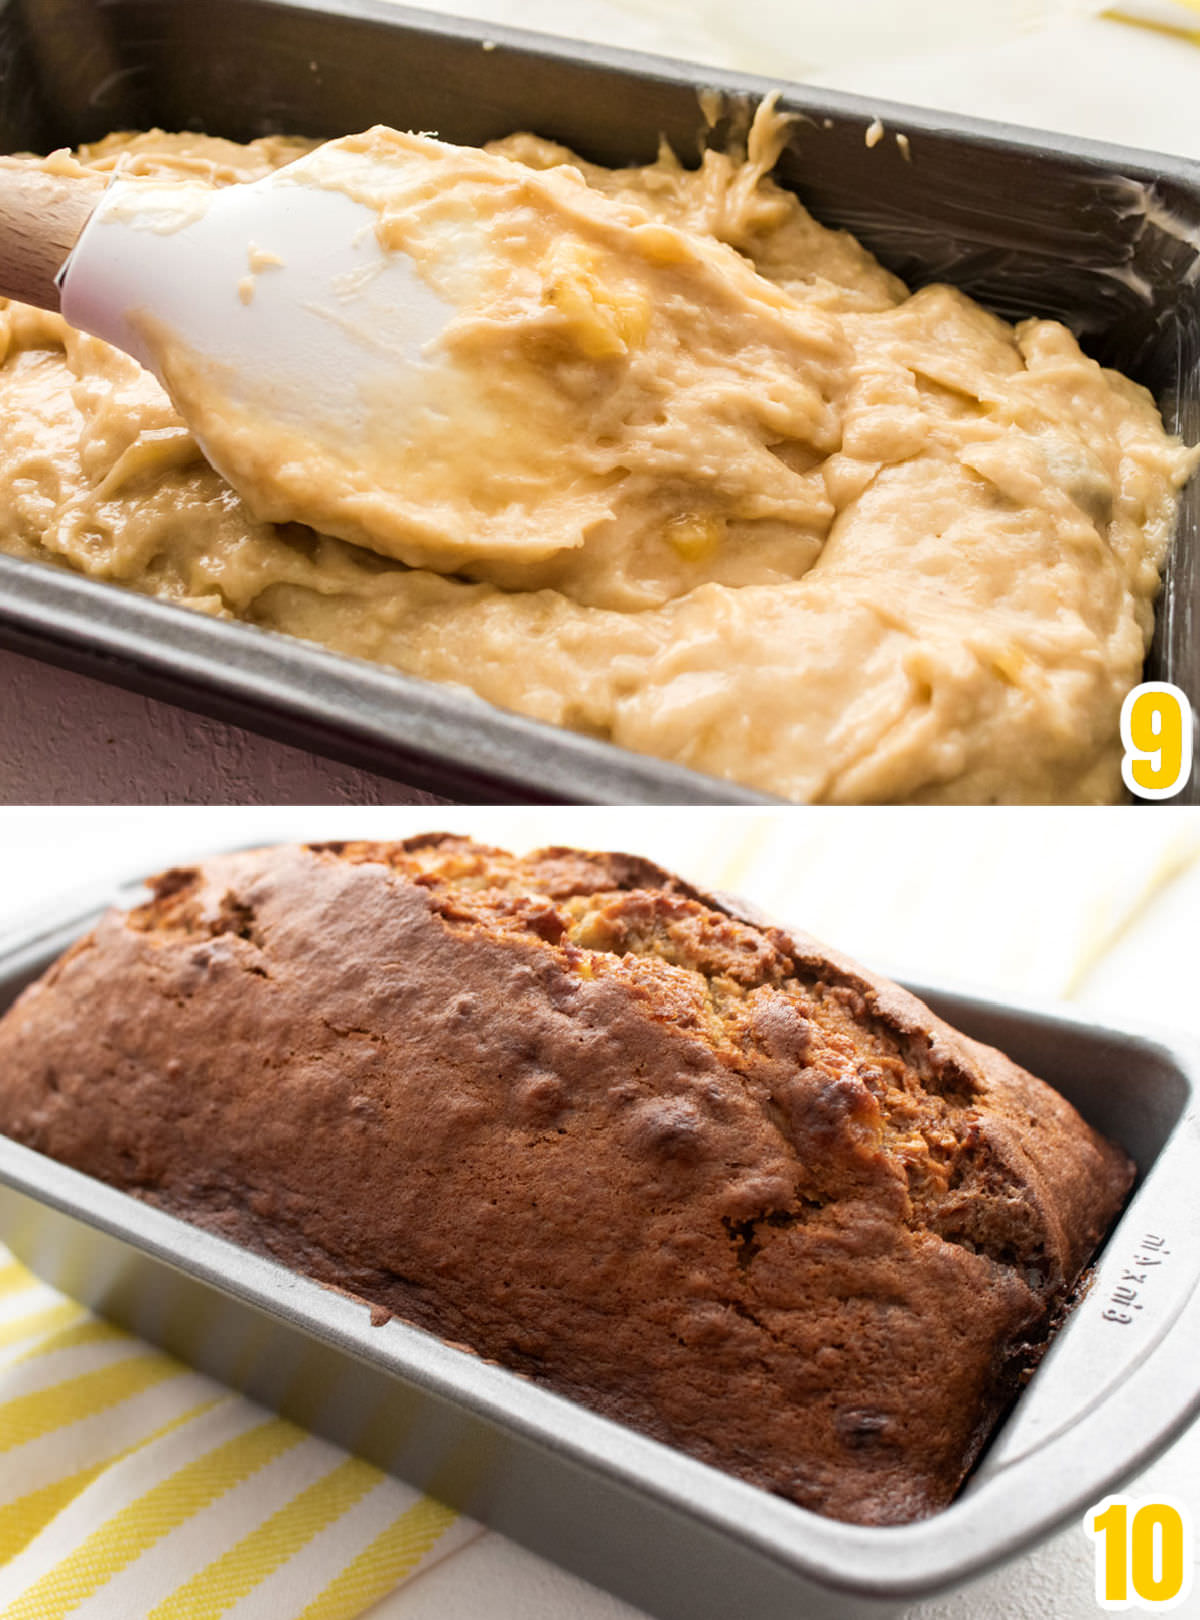 Collage images showing the Banana Bread before going into the oven and after coming out of the oven.